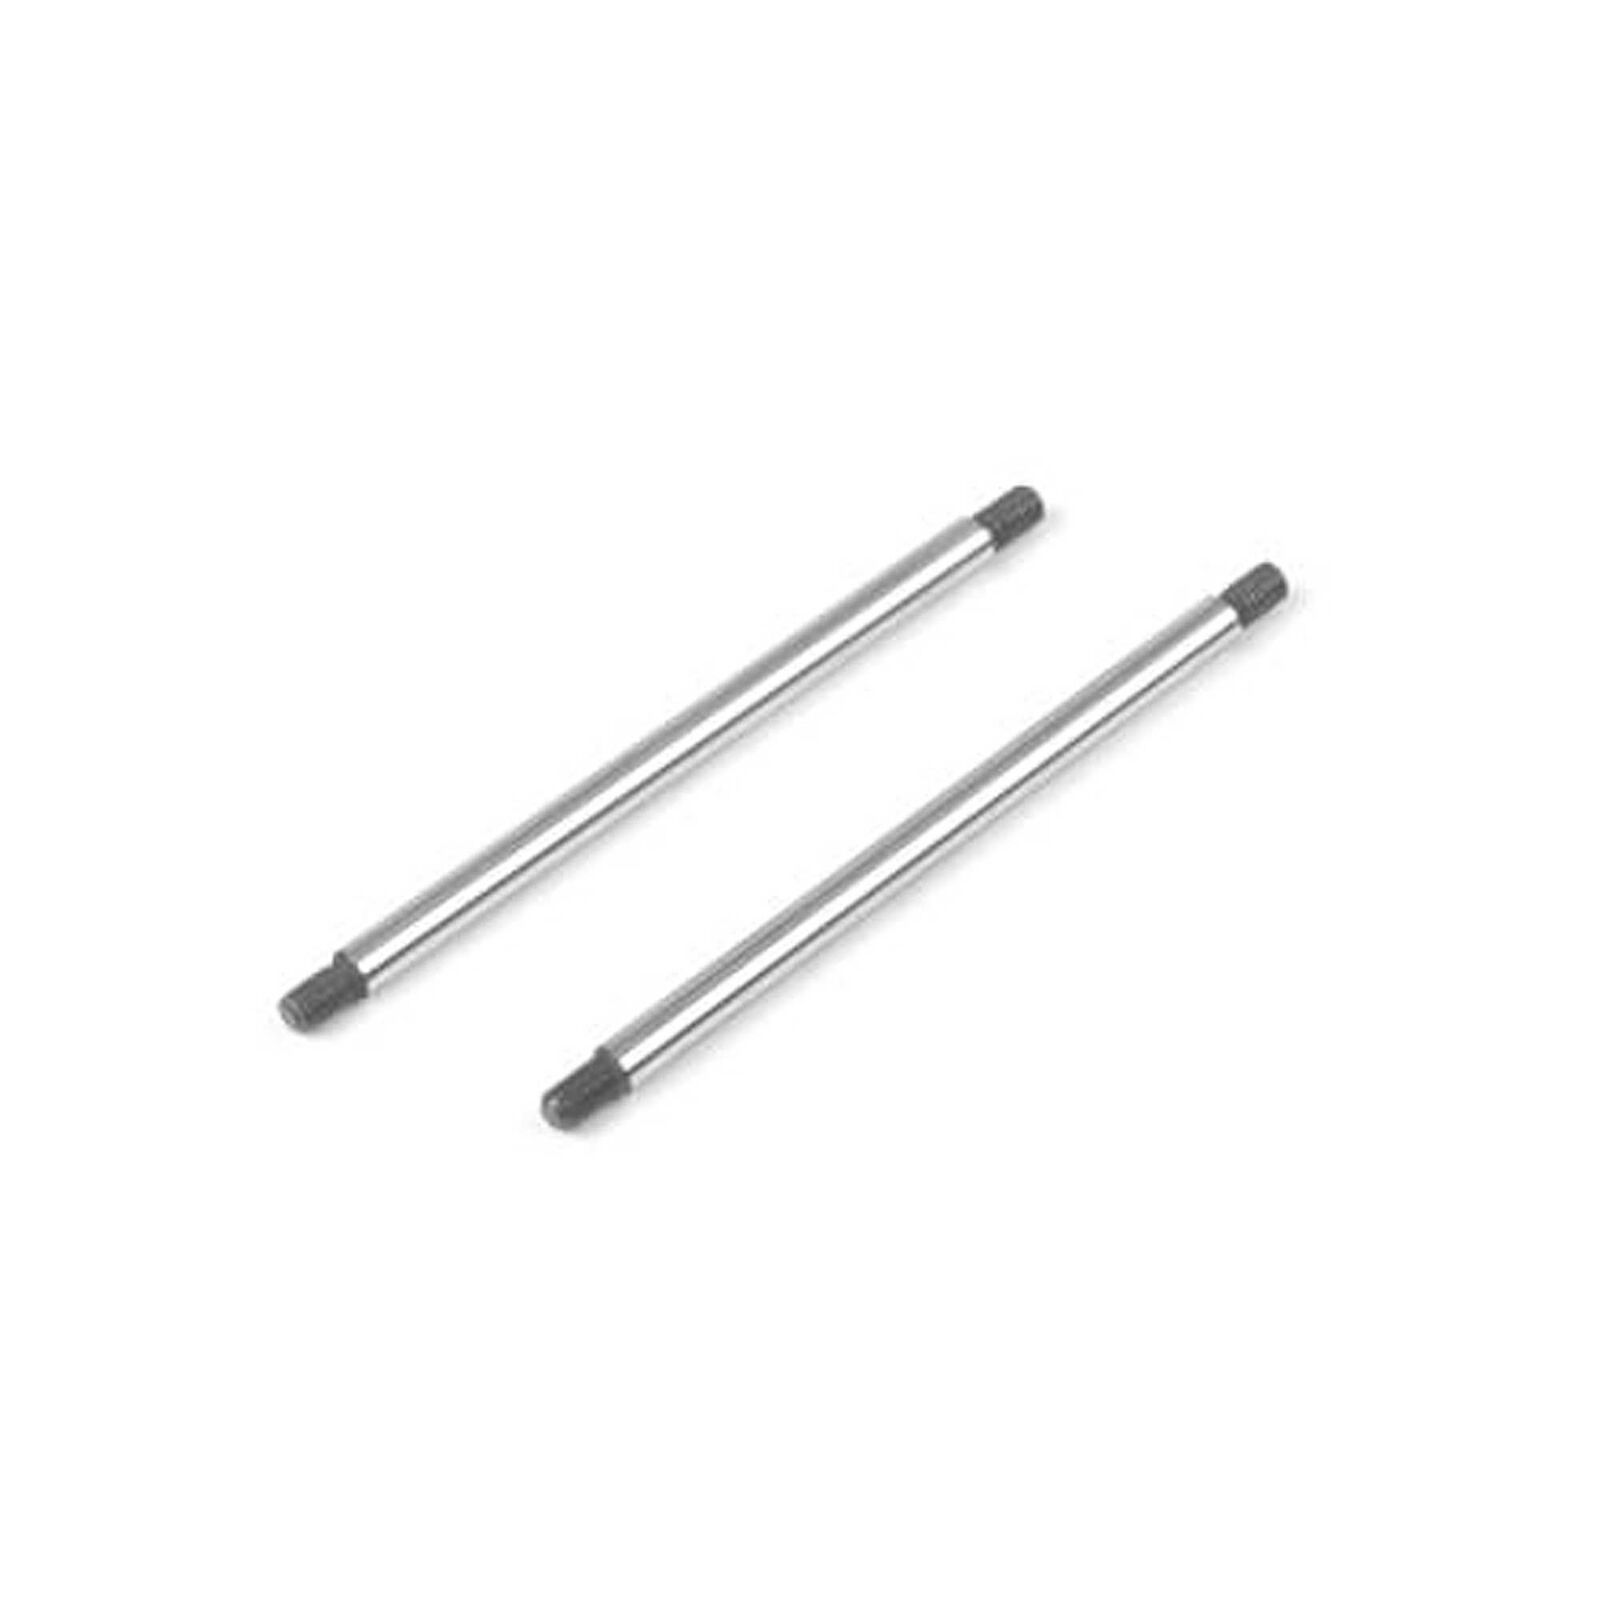 Hinge Pins, Outer/Rear (2)